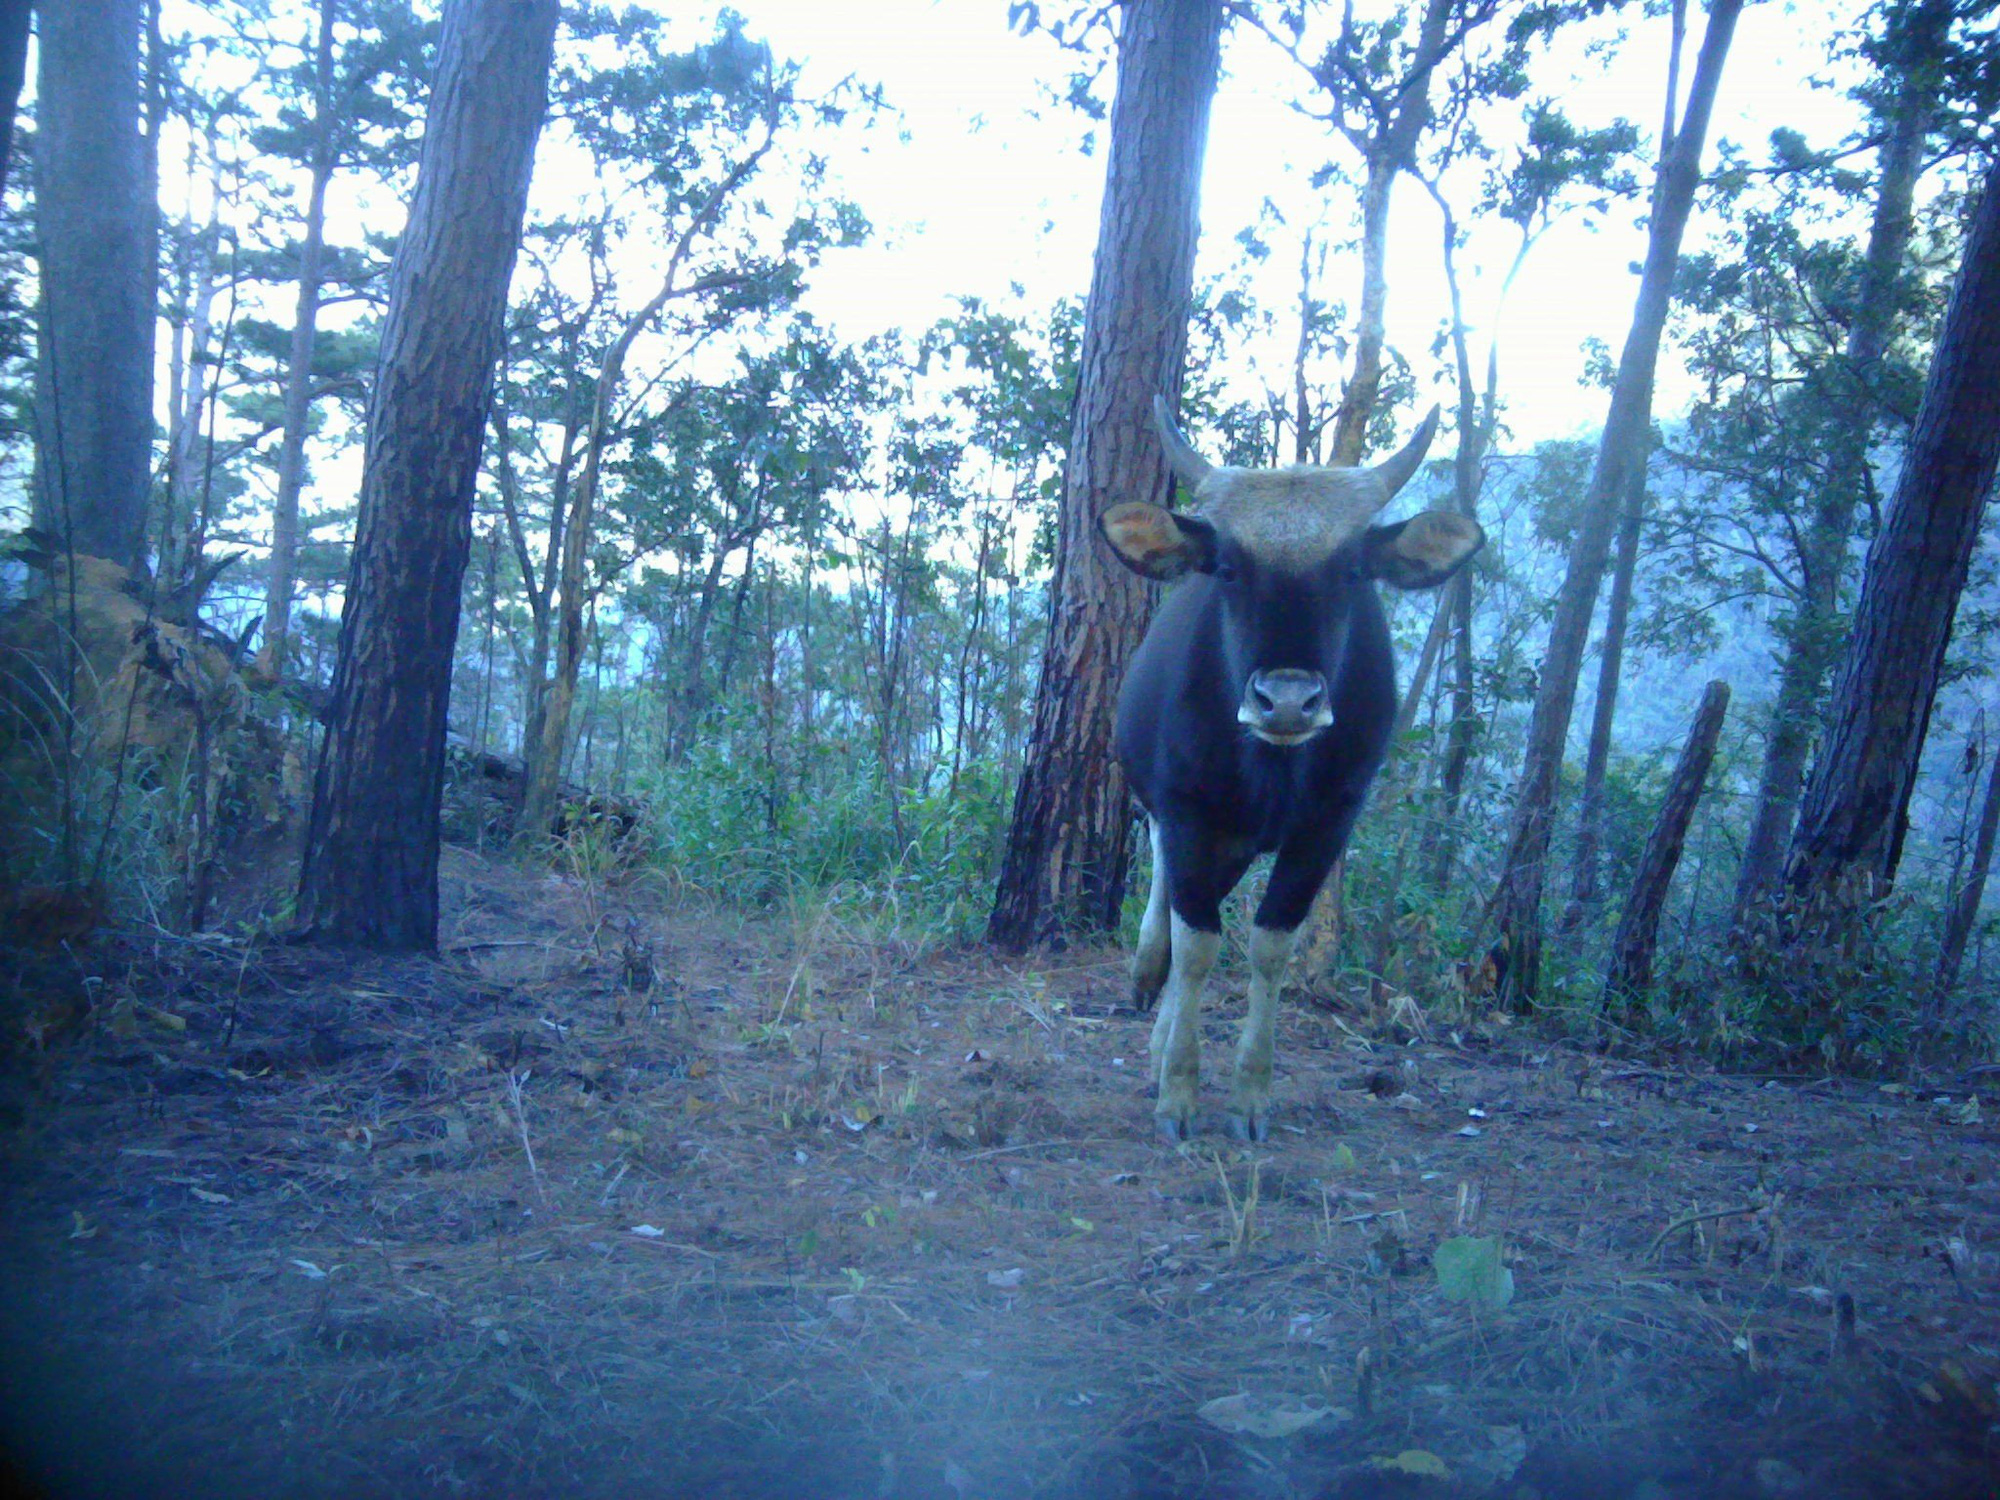 Gaurs spotted by cameras at south-central Vietnam national park